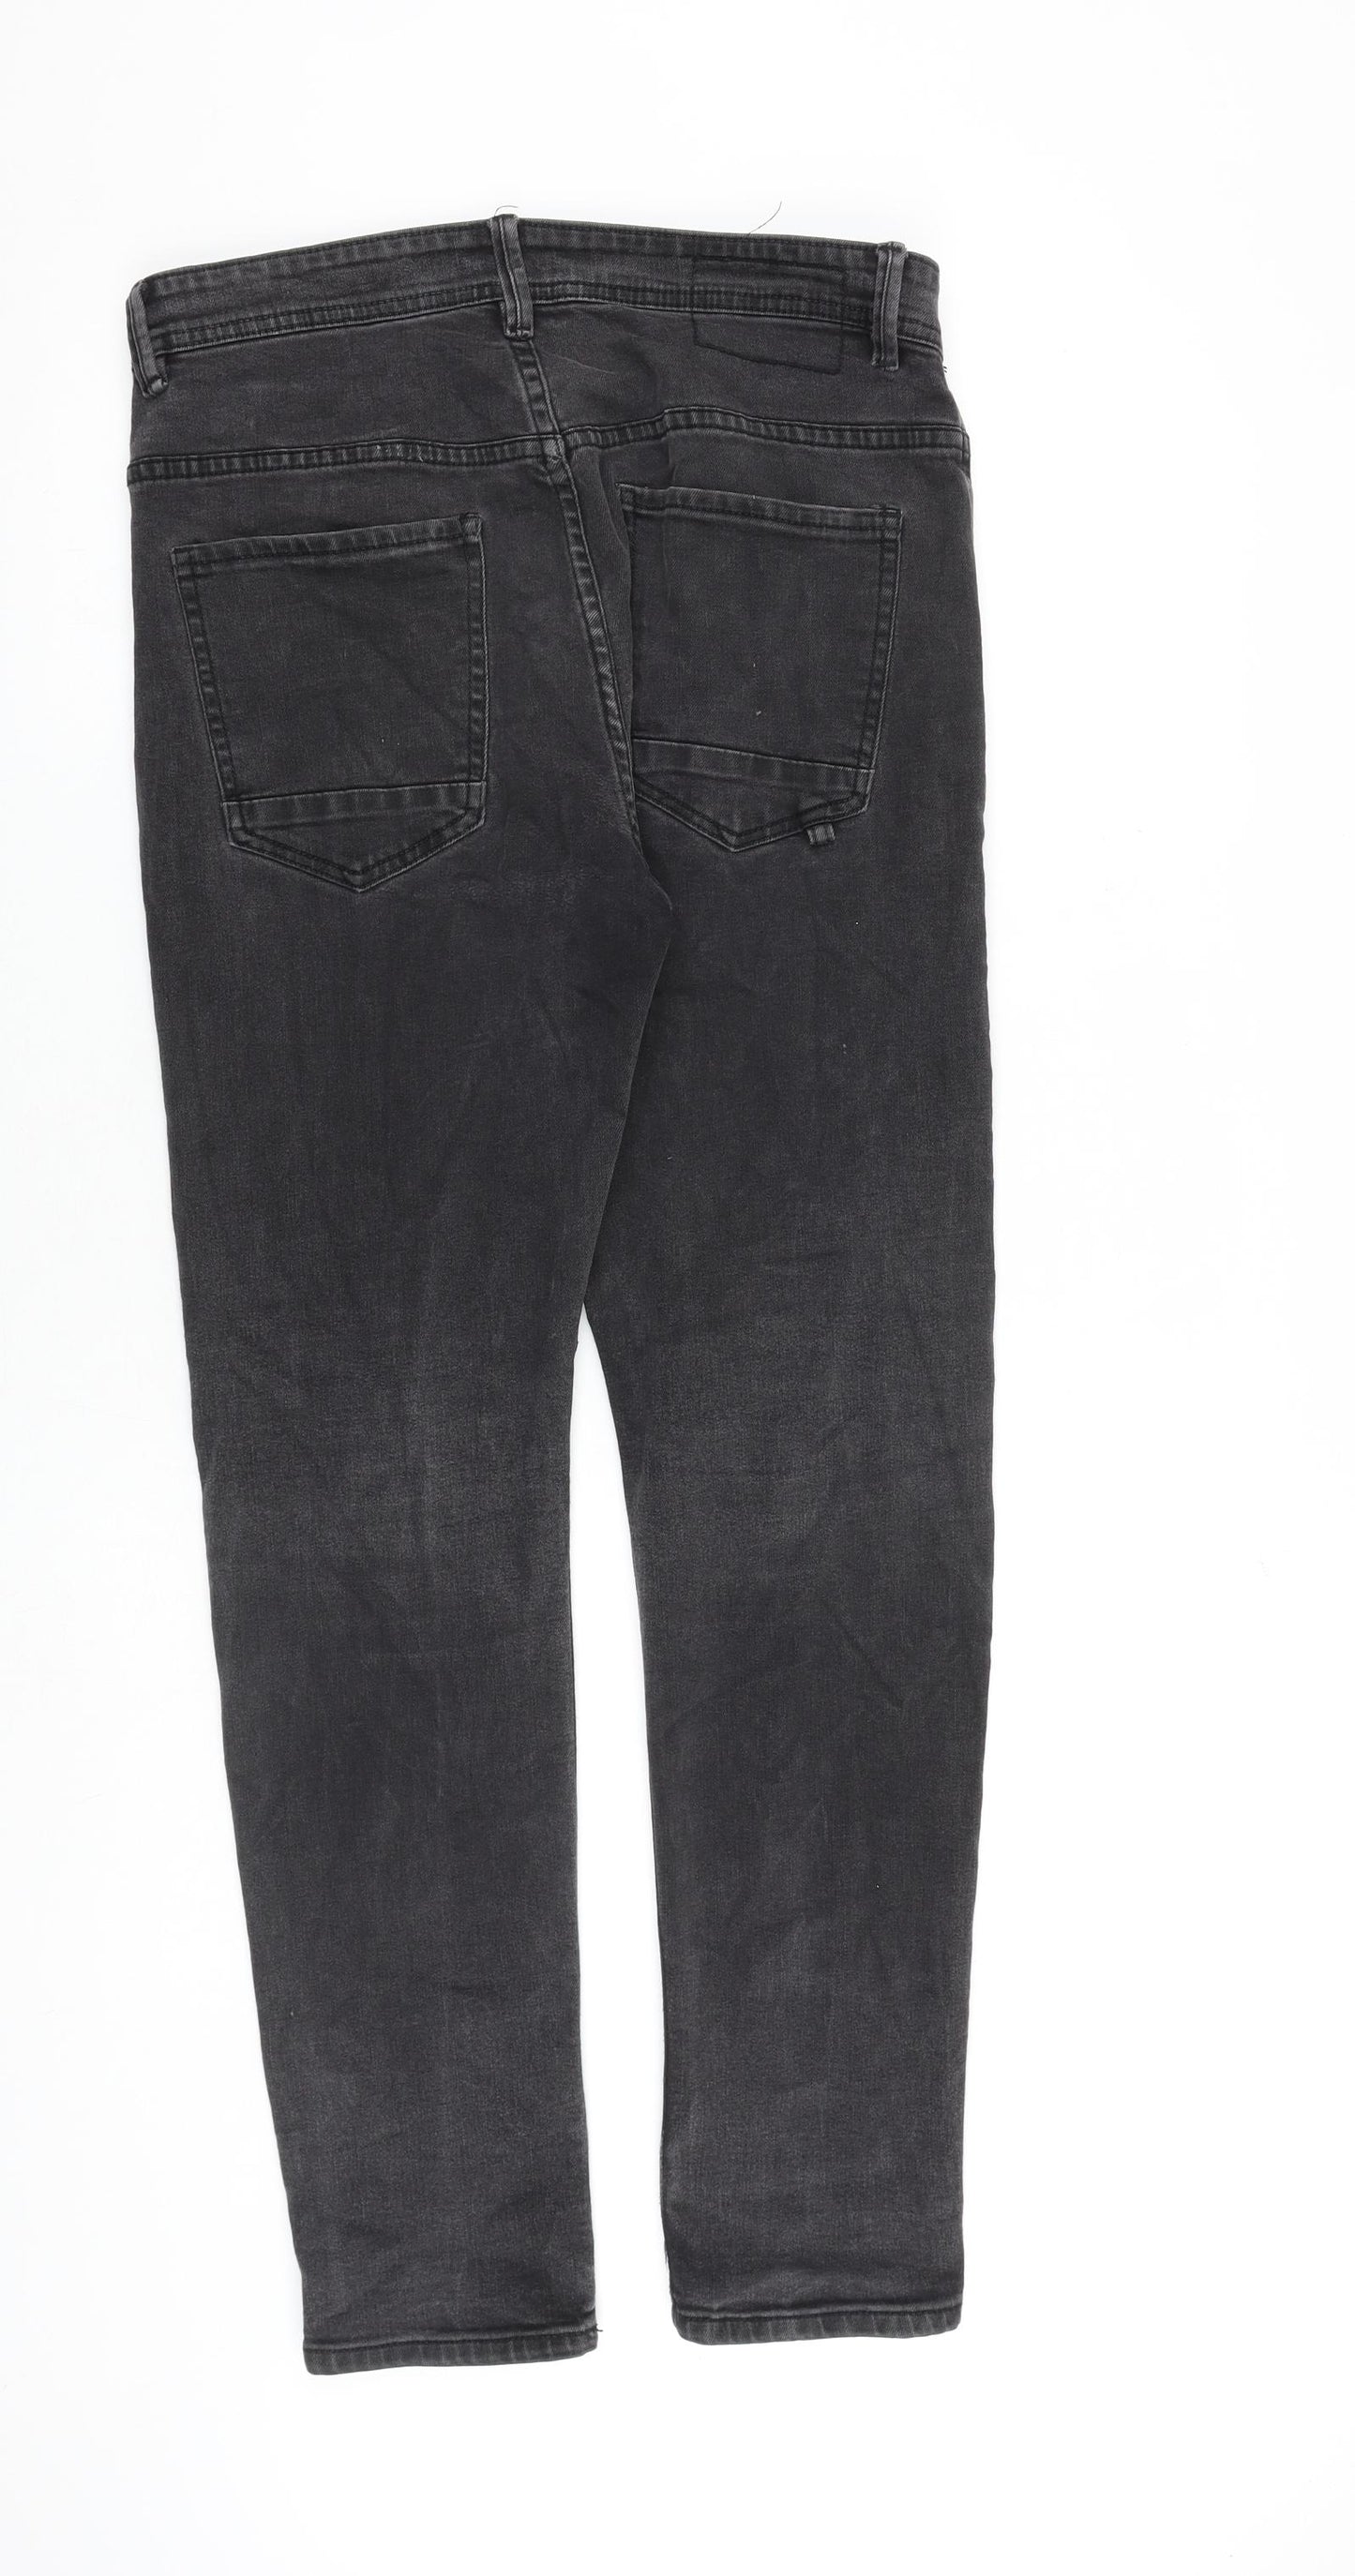 Cotton On Mens Grey Cotton Skinny Jeans Size 32 in L30 in Regular Zip